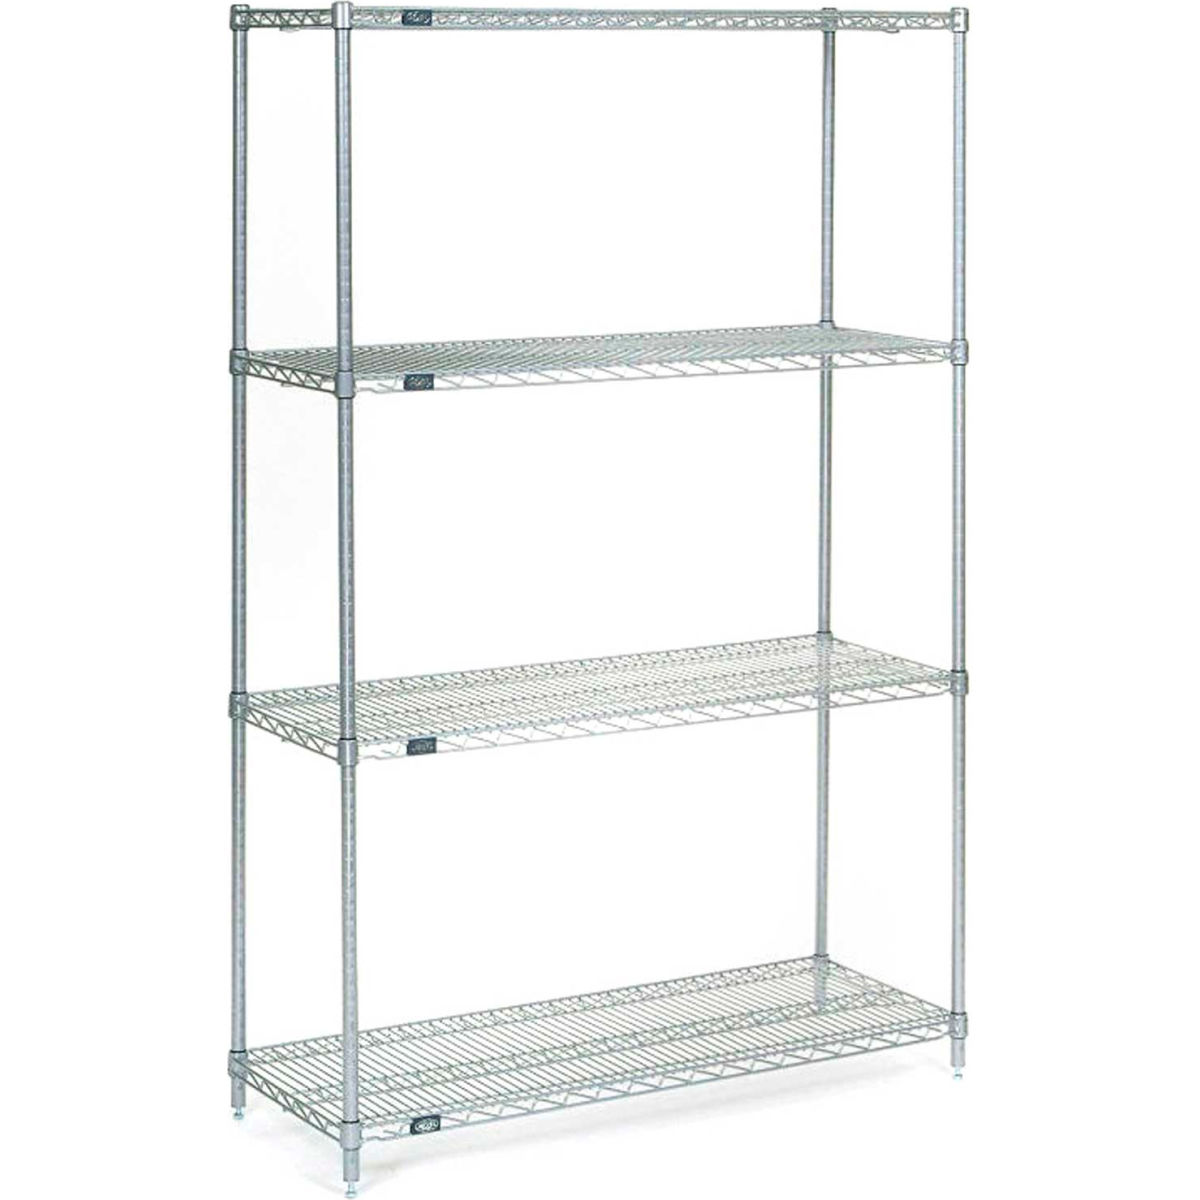 Picture of Global Industrial 14485S 54 x 48 x 14 in. Nexel Stainless Steel Starter Wire Shelving